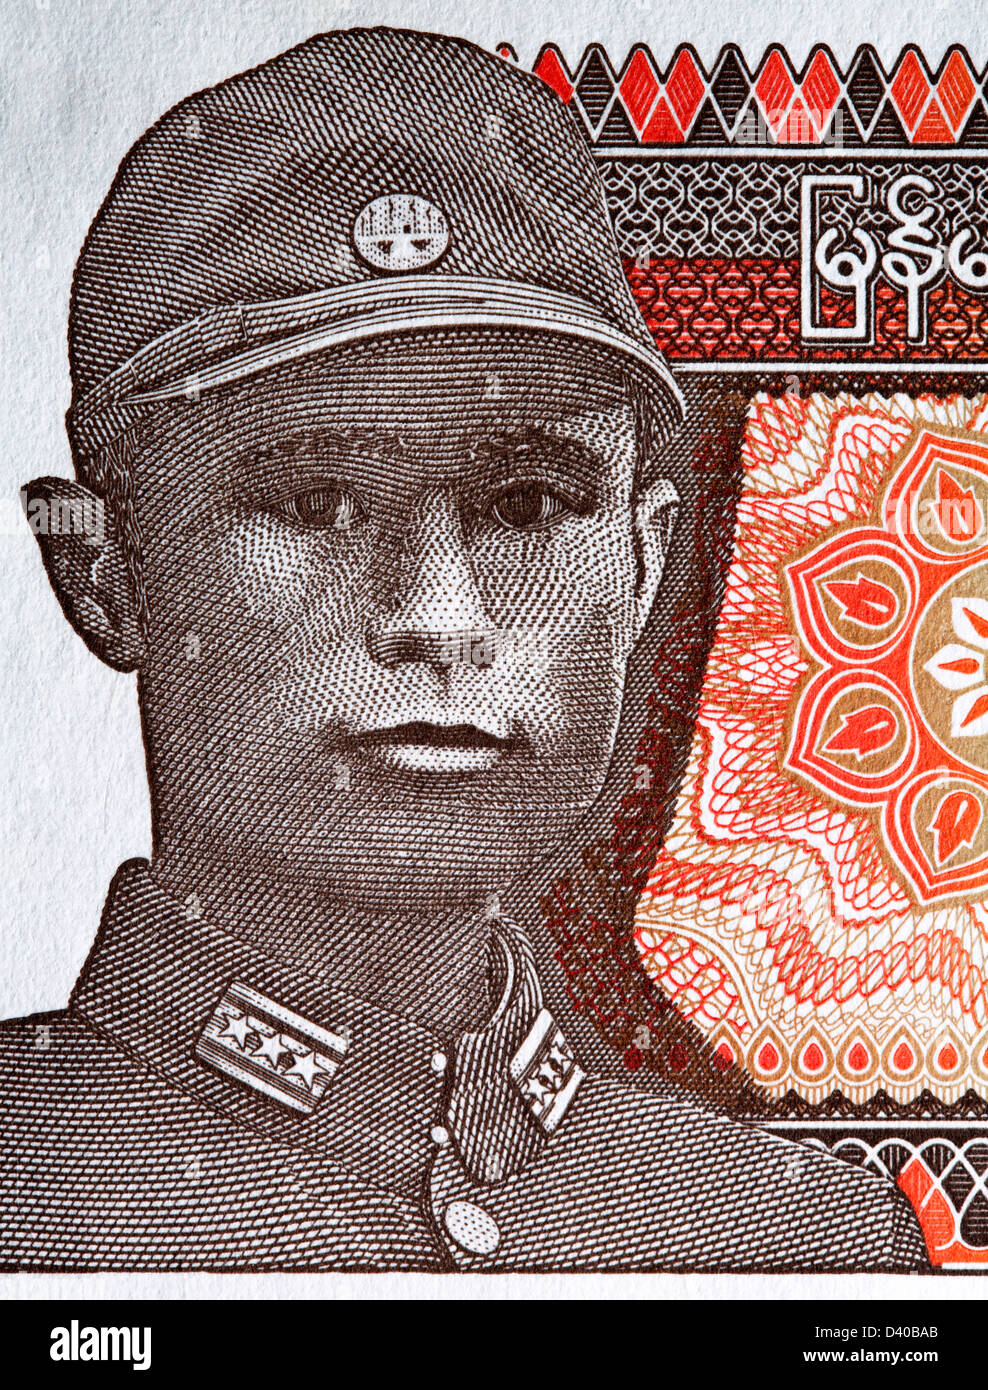 Portrait of from 1 Kyat banknote, General Aung San, Myanmar, 1990 Stock Photo